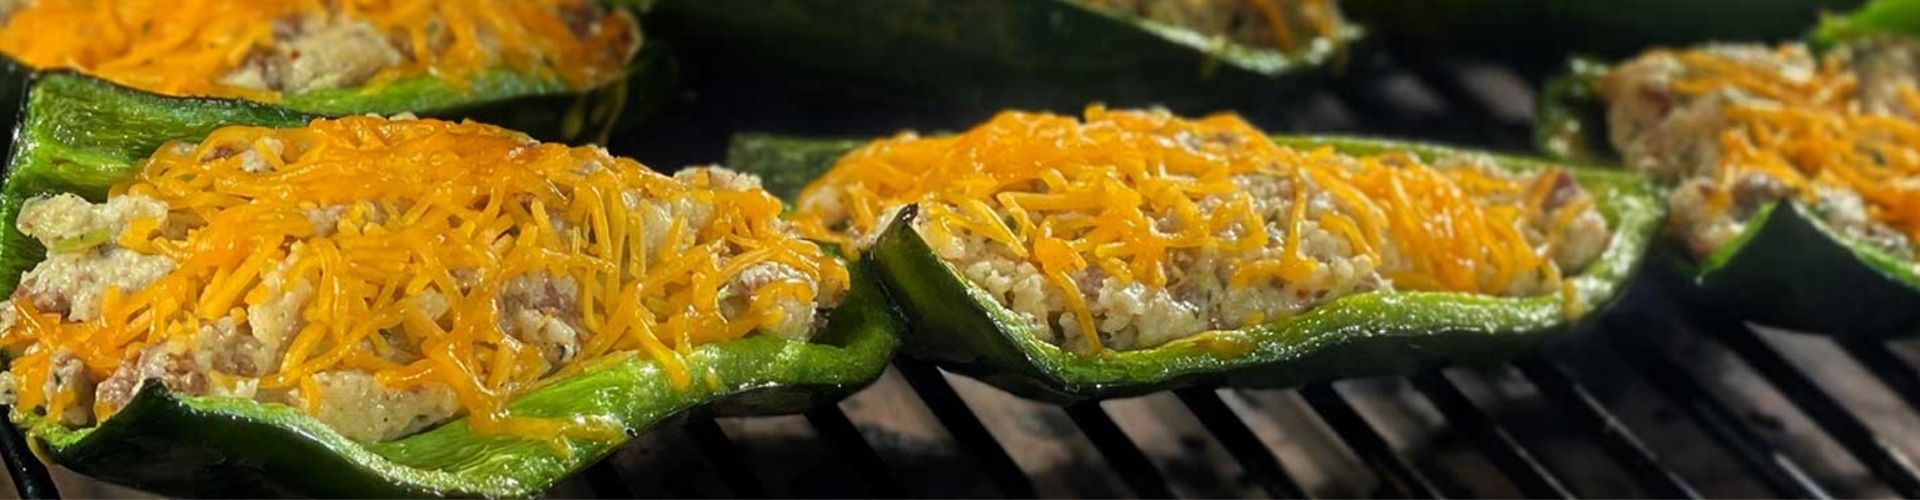 Cilantro Grits Stuffed Poblano Peppers